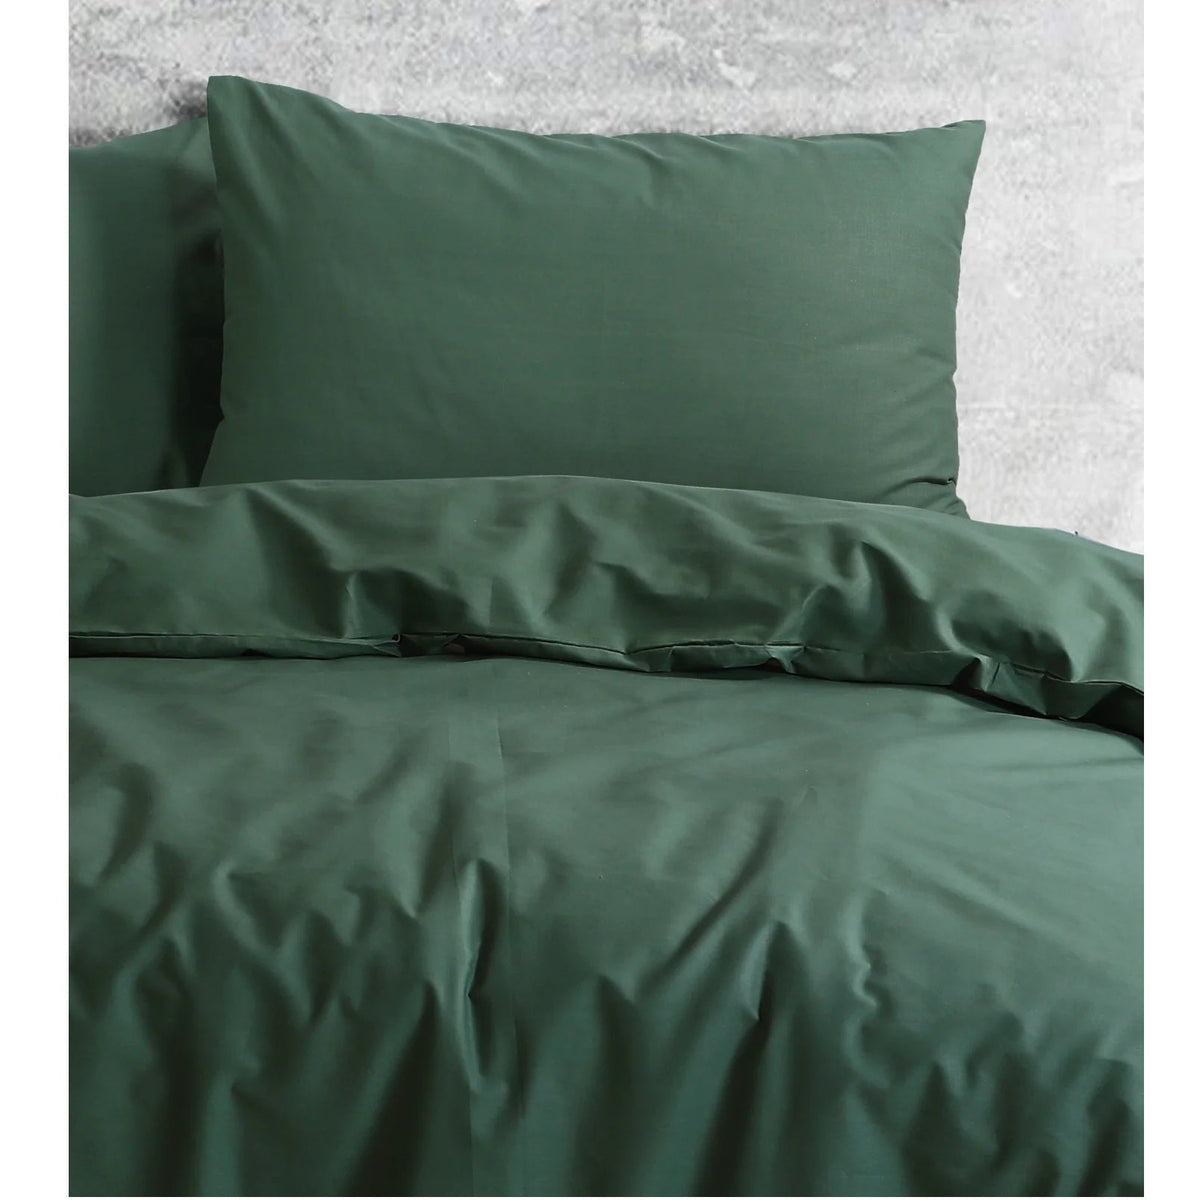 Royale Cotton Quilt Duvet Doona Cover with extra standard pillowcases pair - Sage